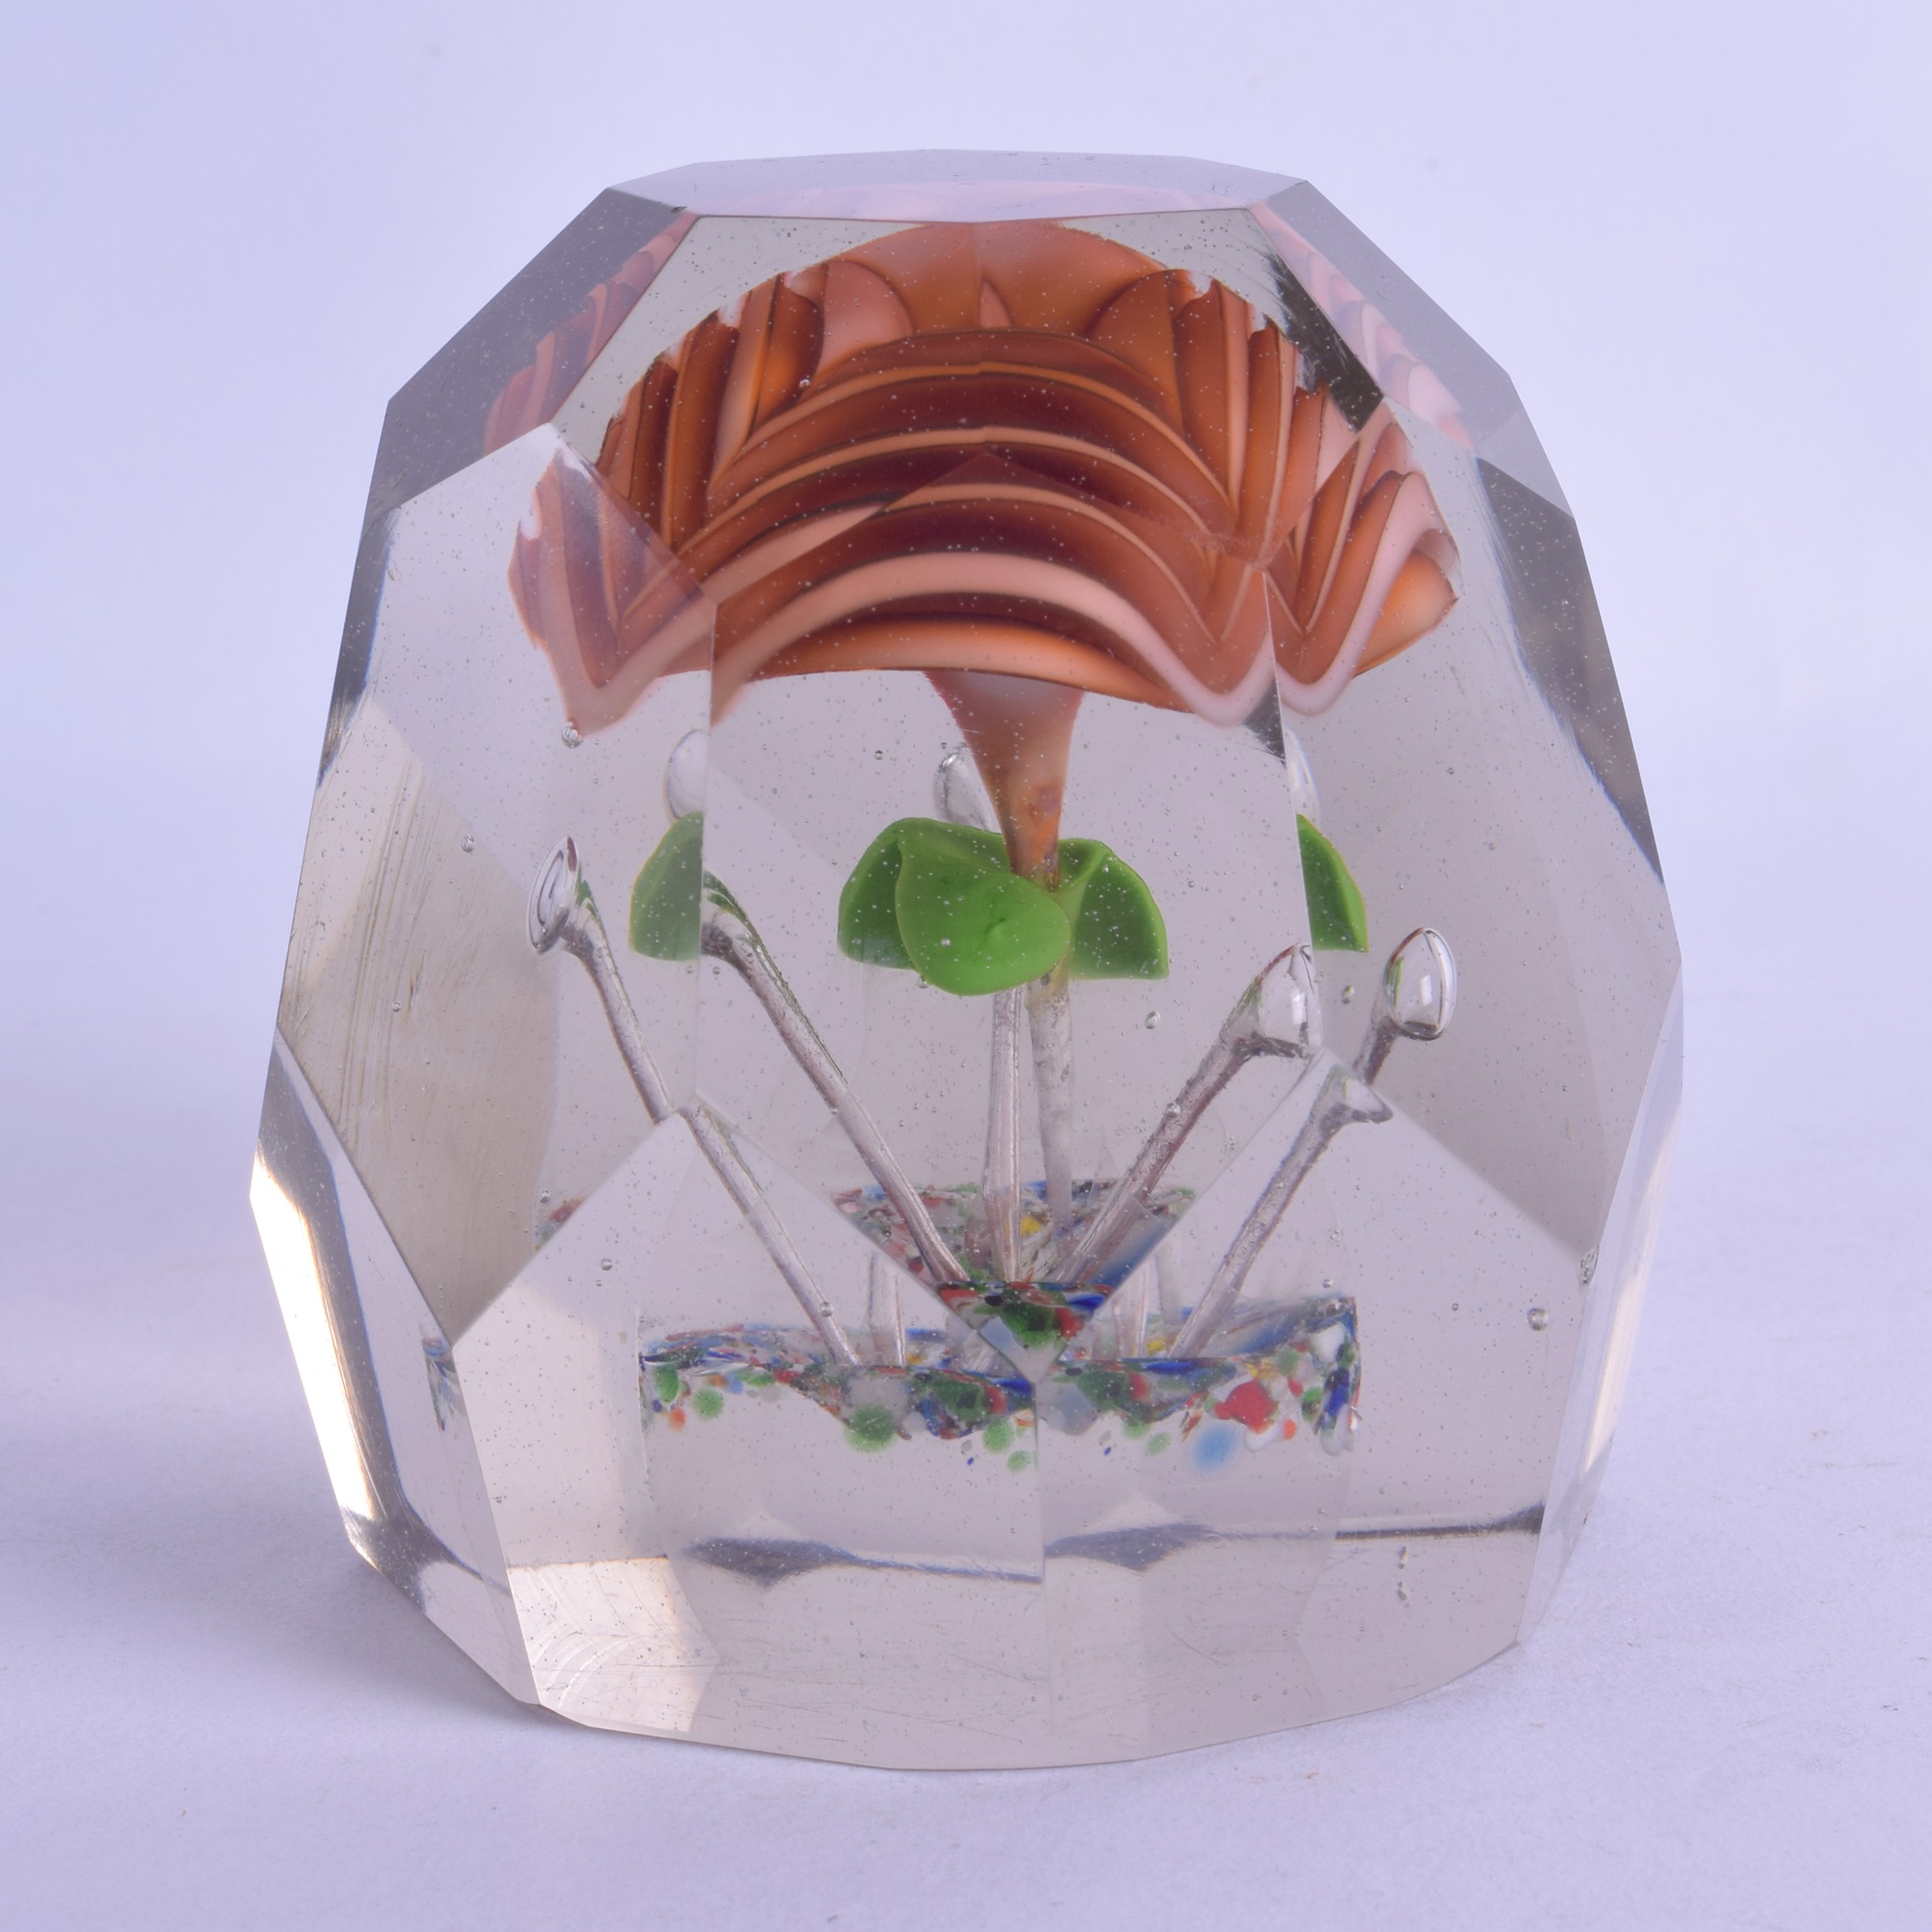 A LARGE ANTIQUE GLASS PAPERWEIGHT with upright pink flower and facetted body. 9.5 cm x 9 cm.